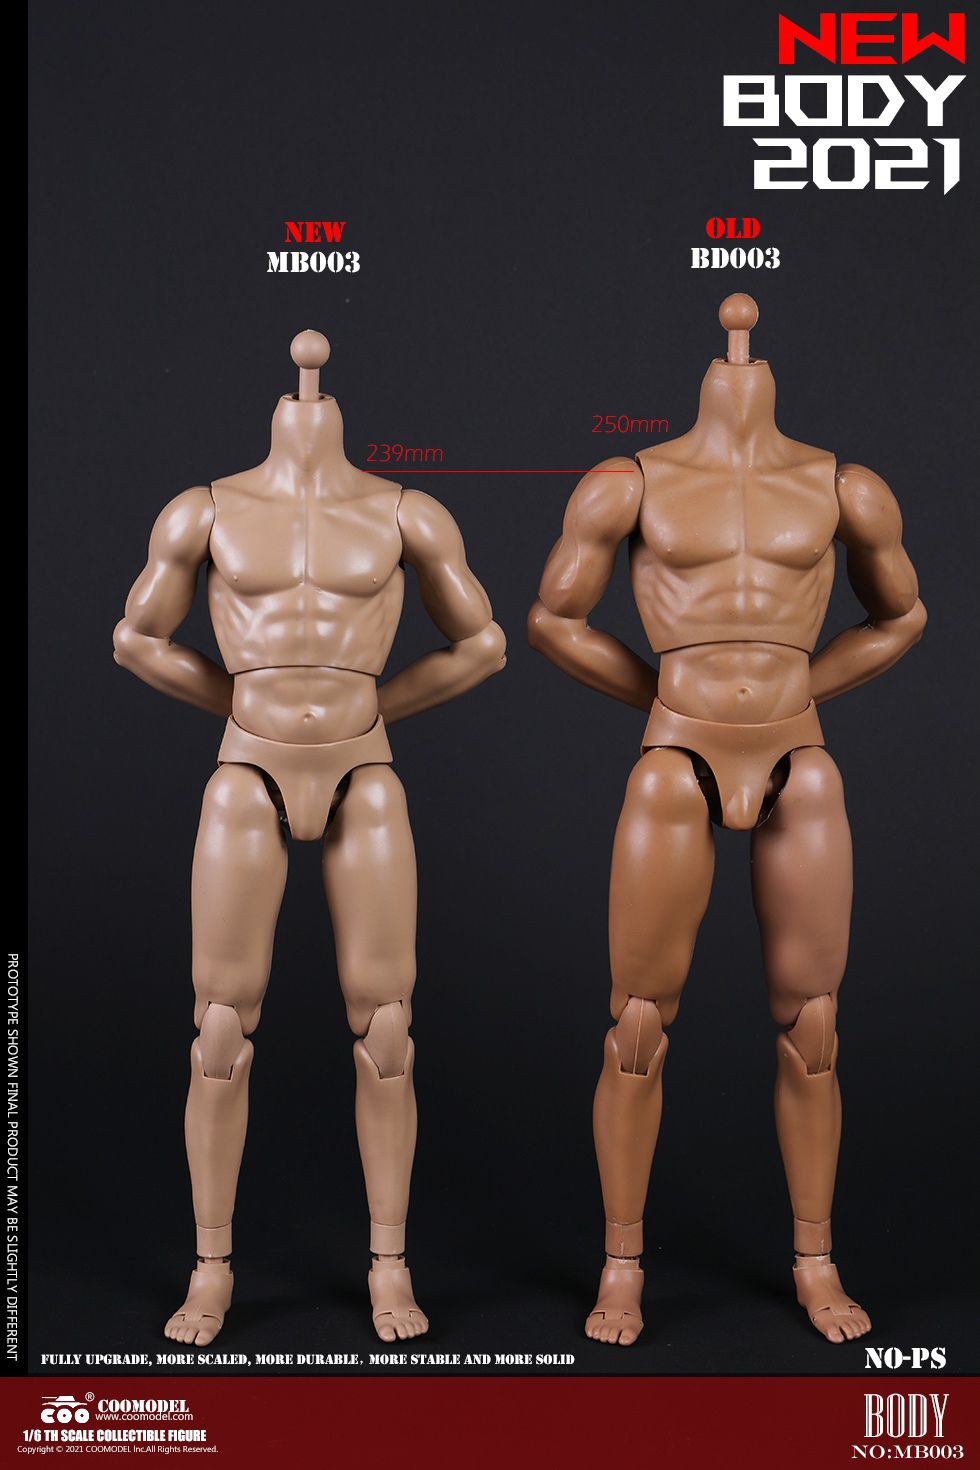 Body - NEW PRODUCT: COOMODEL: 1/6 MB001 standard male body, MB002 tall male body, MB003 muscle male body, MB004 tall muscle body 18100310